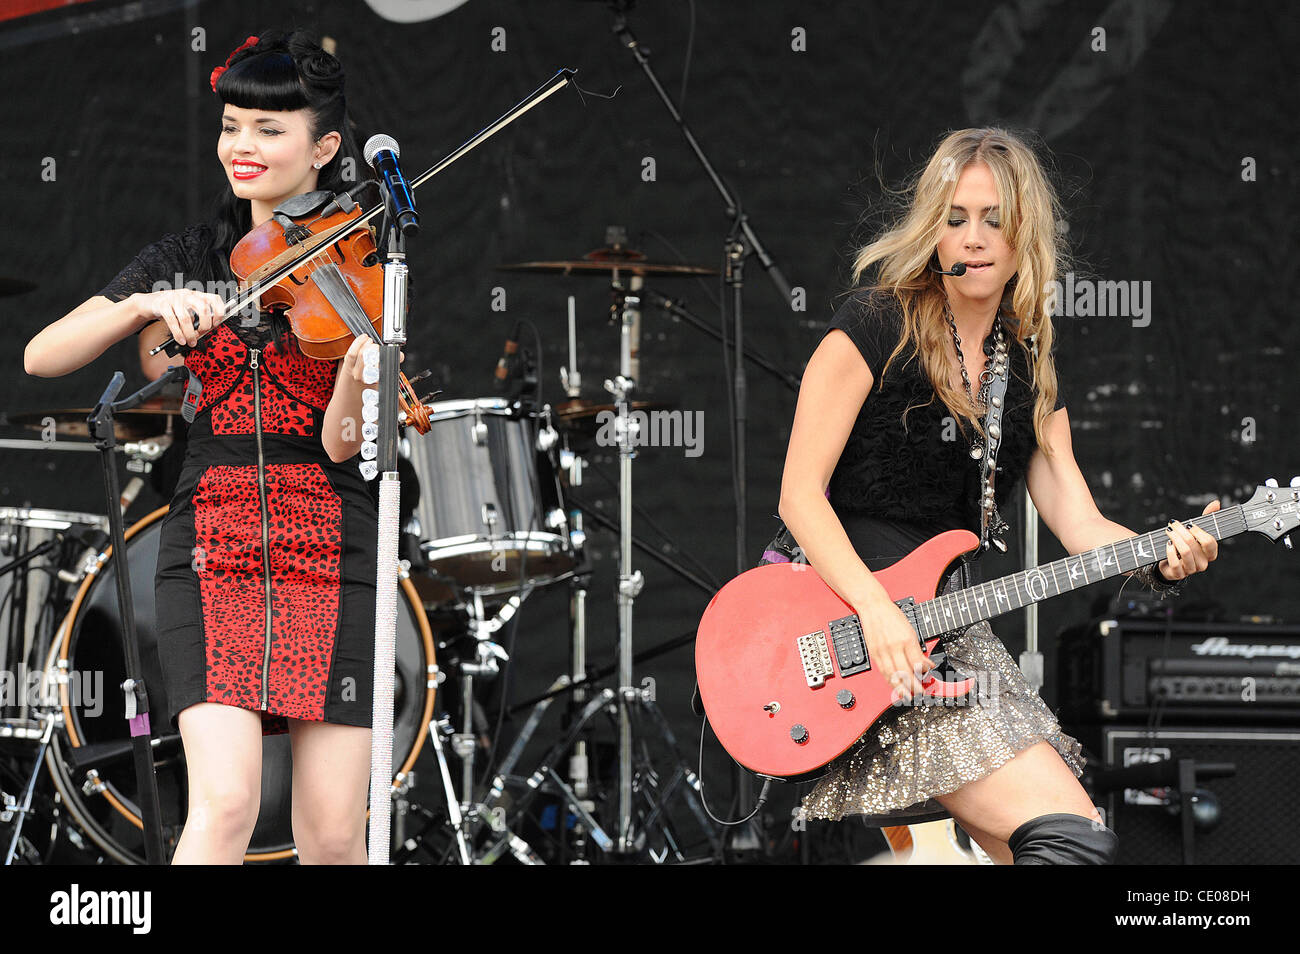 Sept 25, 2011 - Raleigh, North Carolina; USA - (L-R) Musician SUSIE BROWN and DANELLE LEVERETT of the band The JaneDear Girls performs live as part of the 2011 Brad Paisley H20 II Wetter & Wilder World Tour as it closes out on the last night at the Time Warner Cable Music Pavilion located in Raleigh Stock Photo